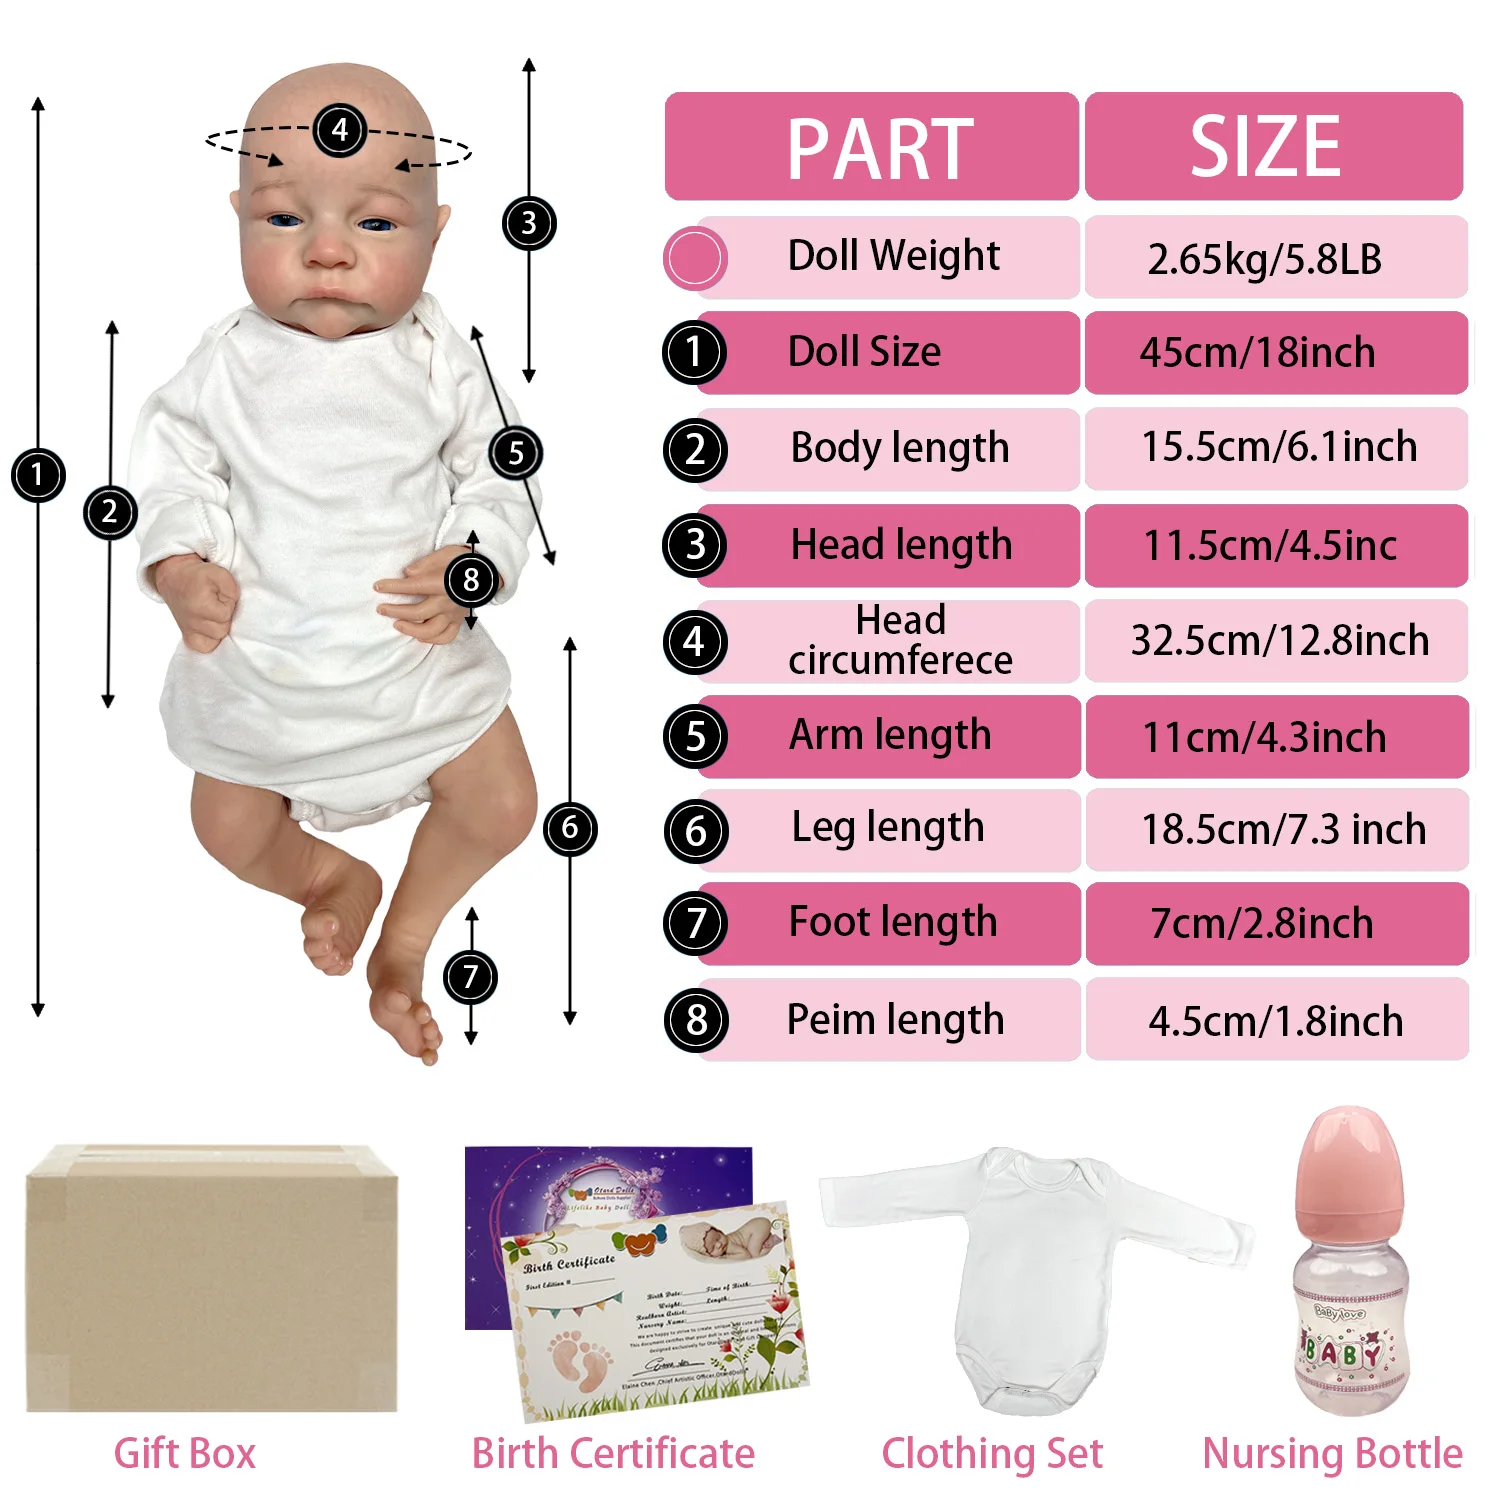 Attyi 18 Inch Girl and Boy Levi Reborn Baby Doll Full Body Solid Silicone Realistic Newborn Doll Toy bebes rerbon silicona